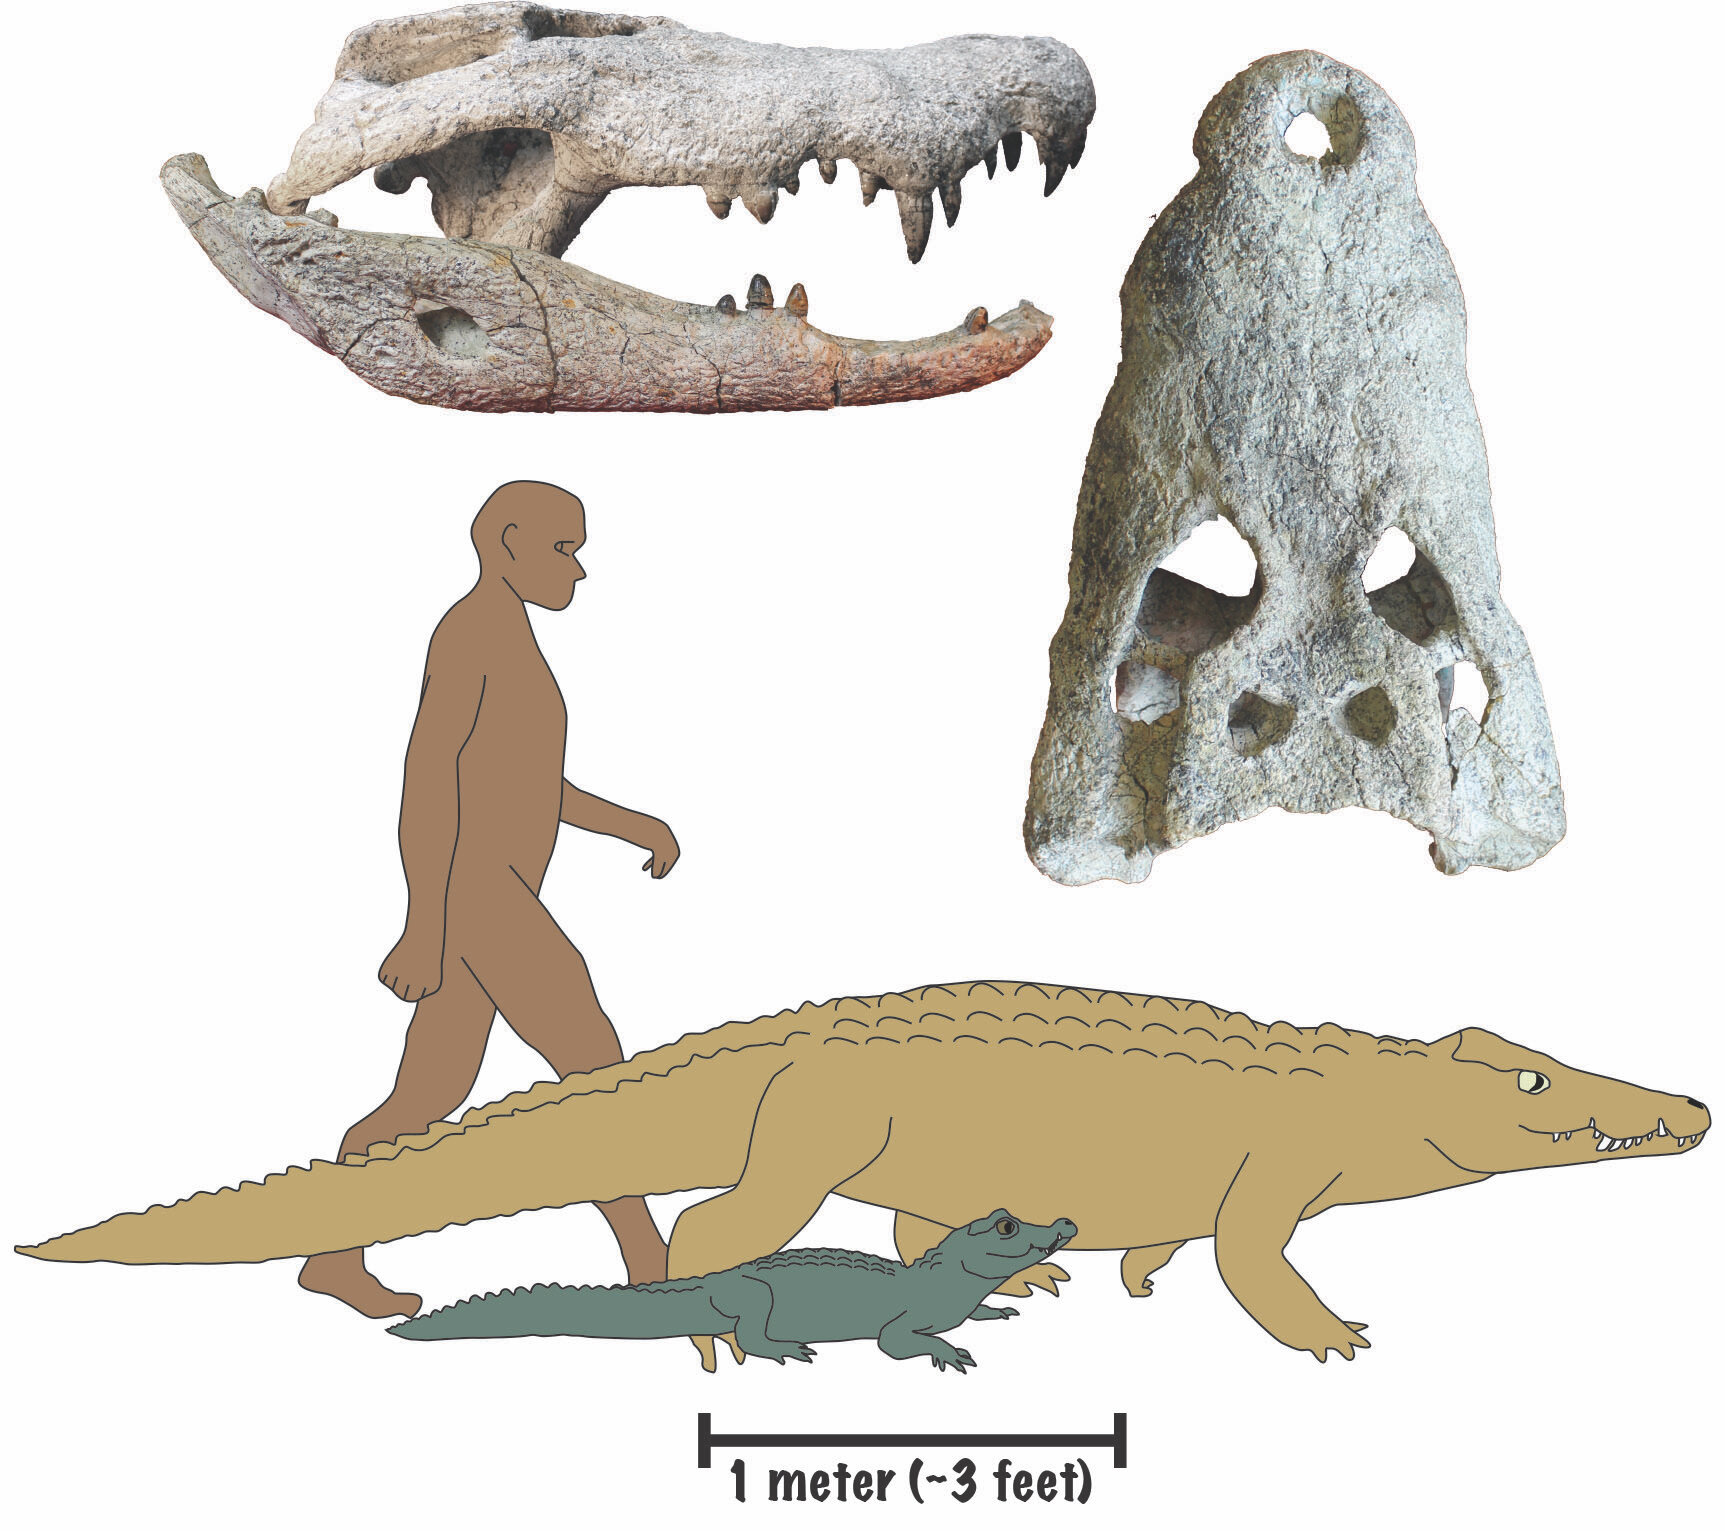 #Researchers discover crocodile species that likely preyed on human ancestors